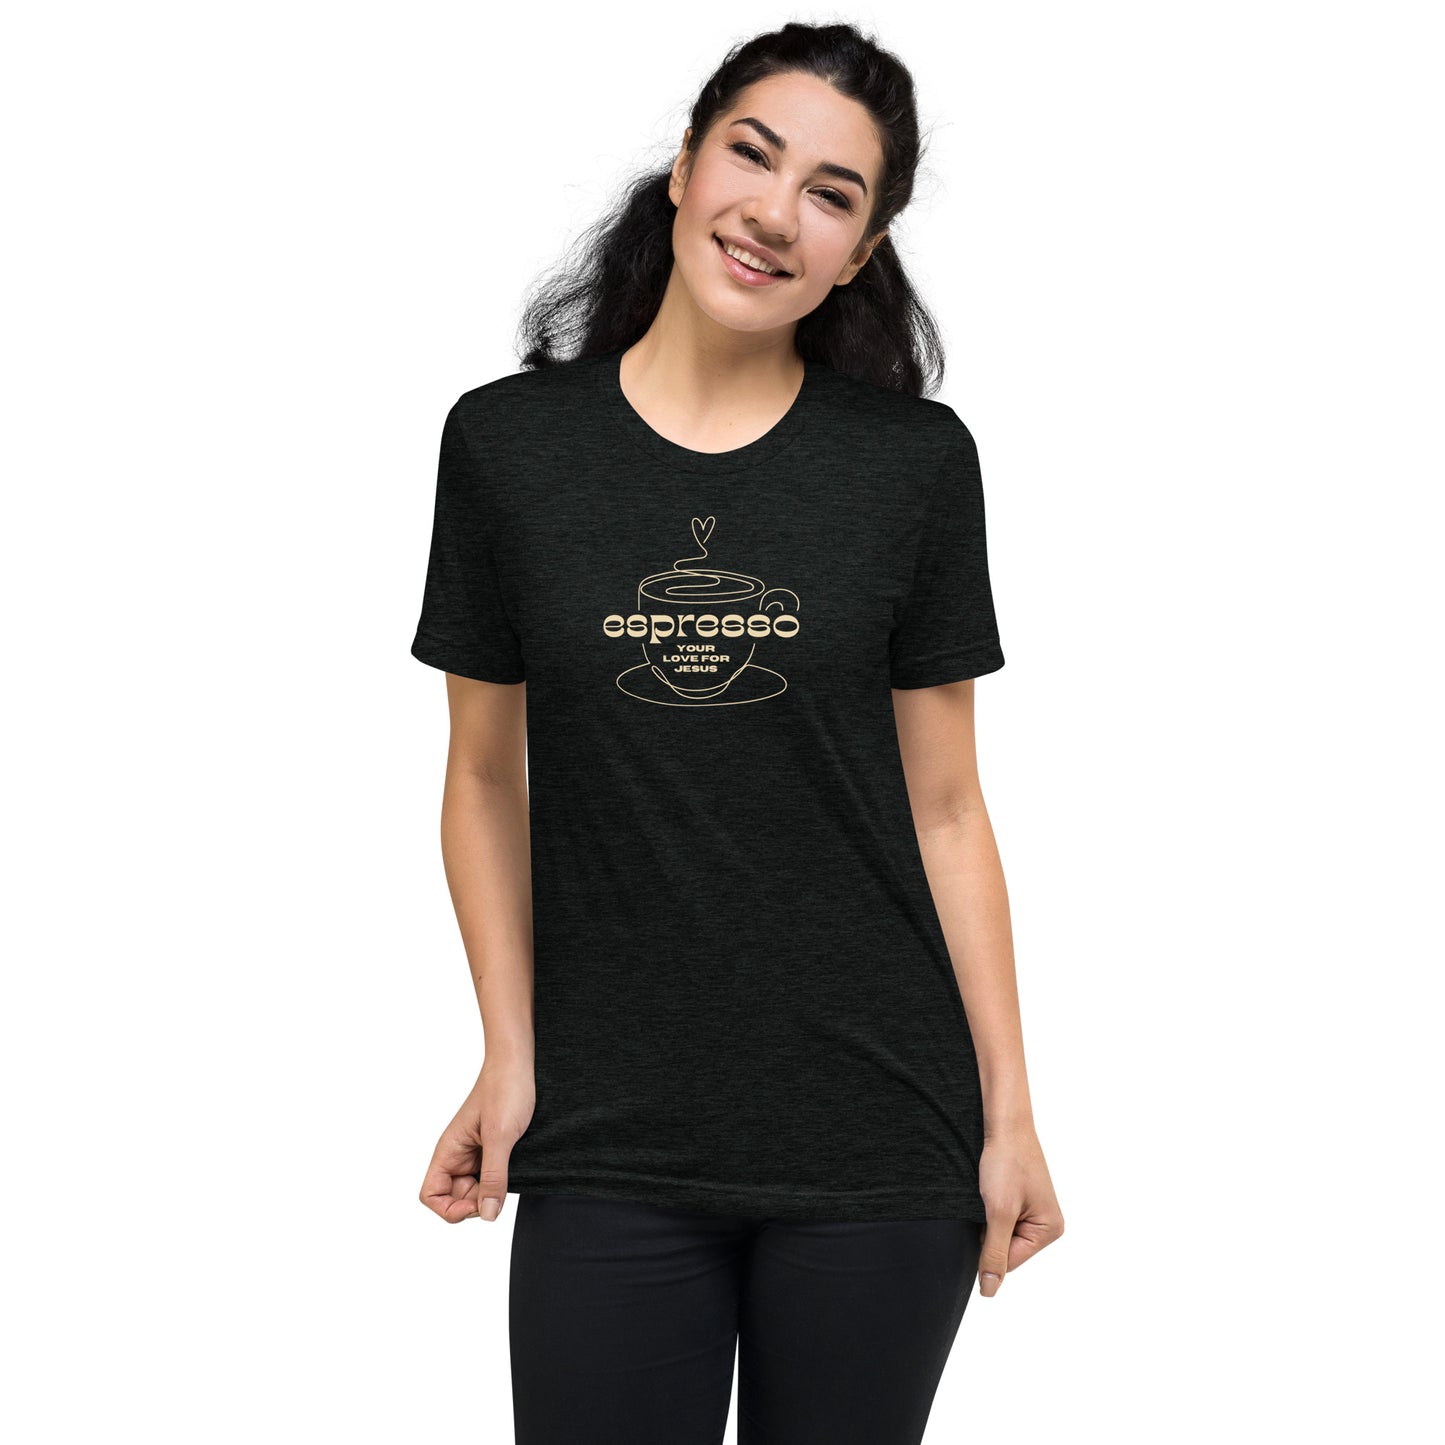 "Espresso Your Love for Jesus" Short sleeve t-shirt